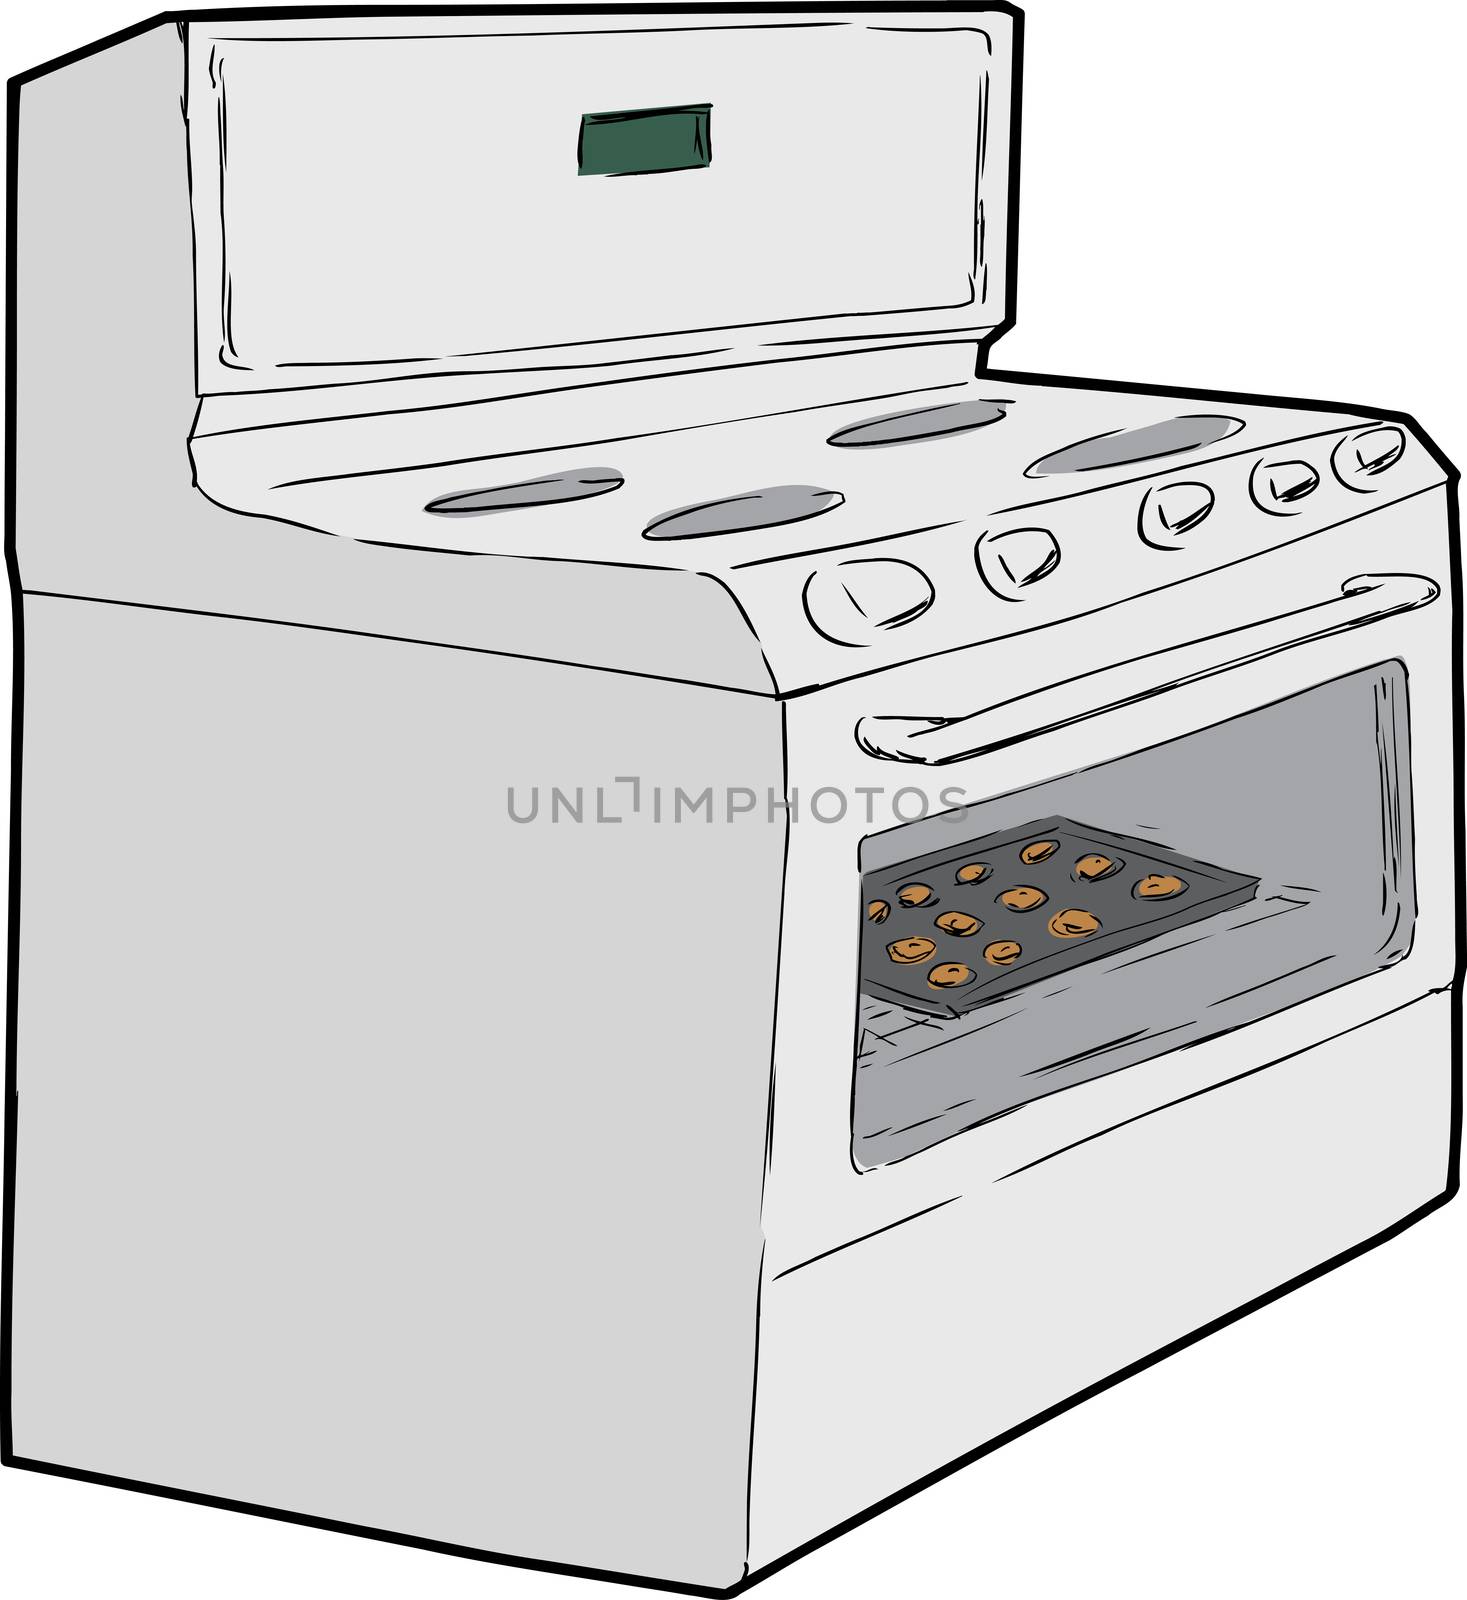 Cartoon sketch of induction stove with tray of cookies baking inside